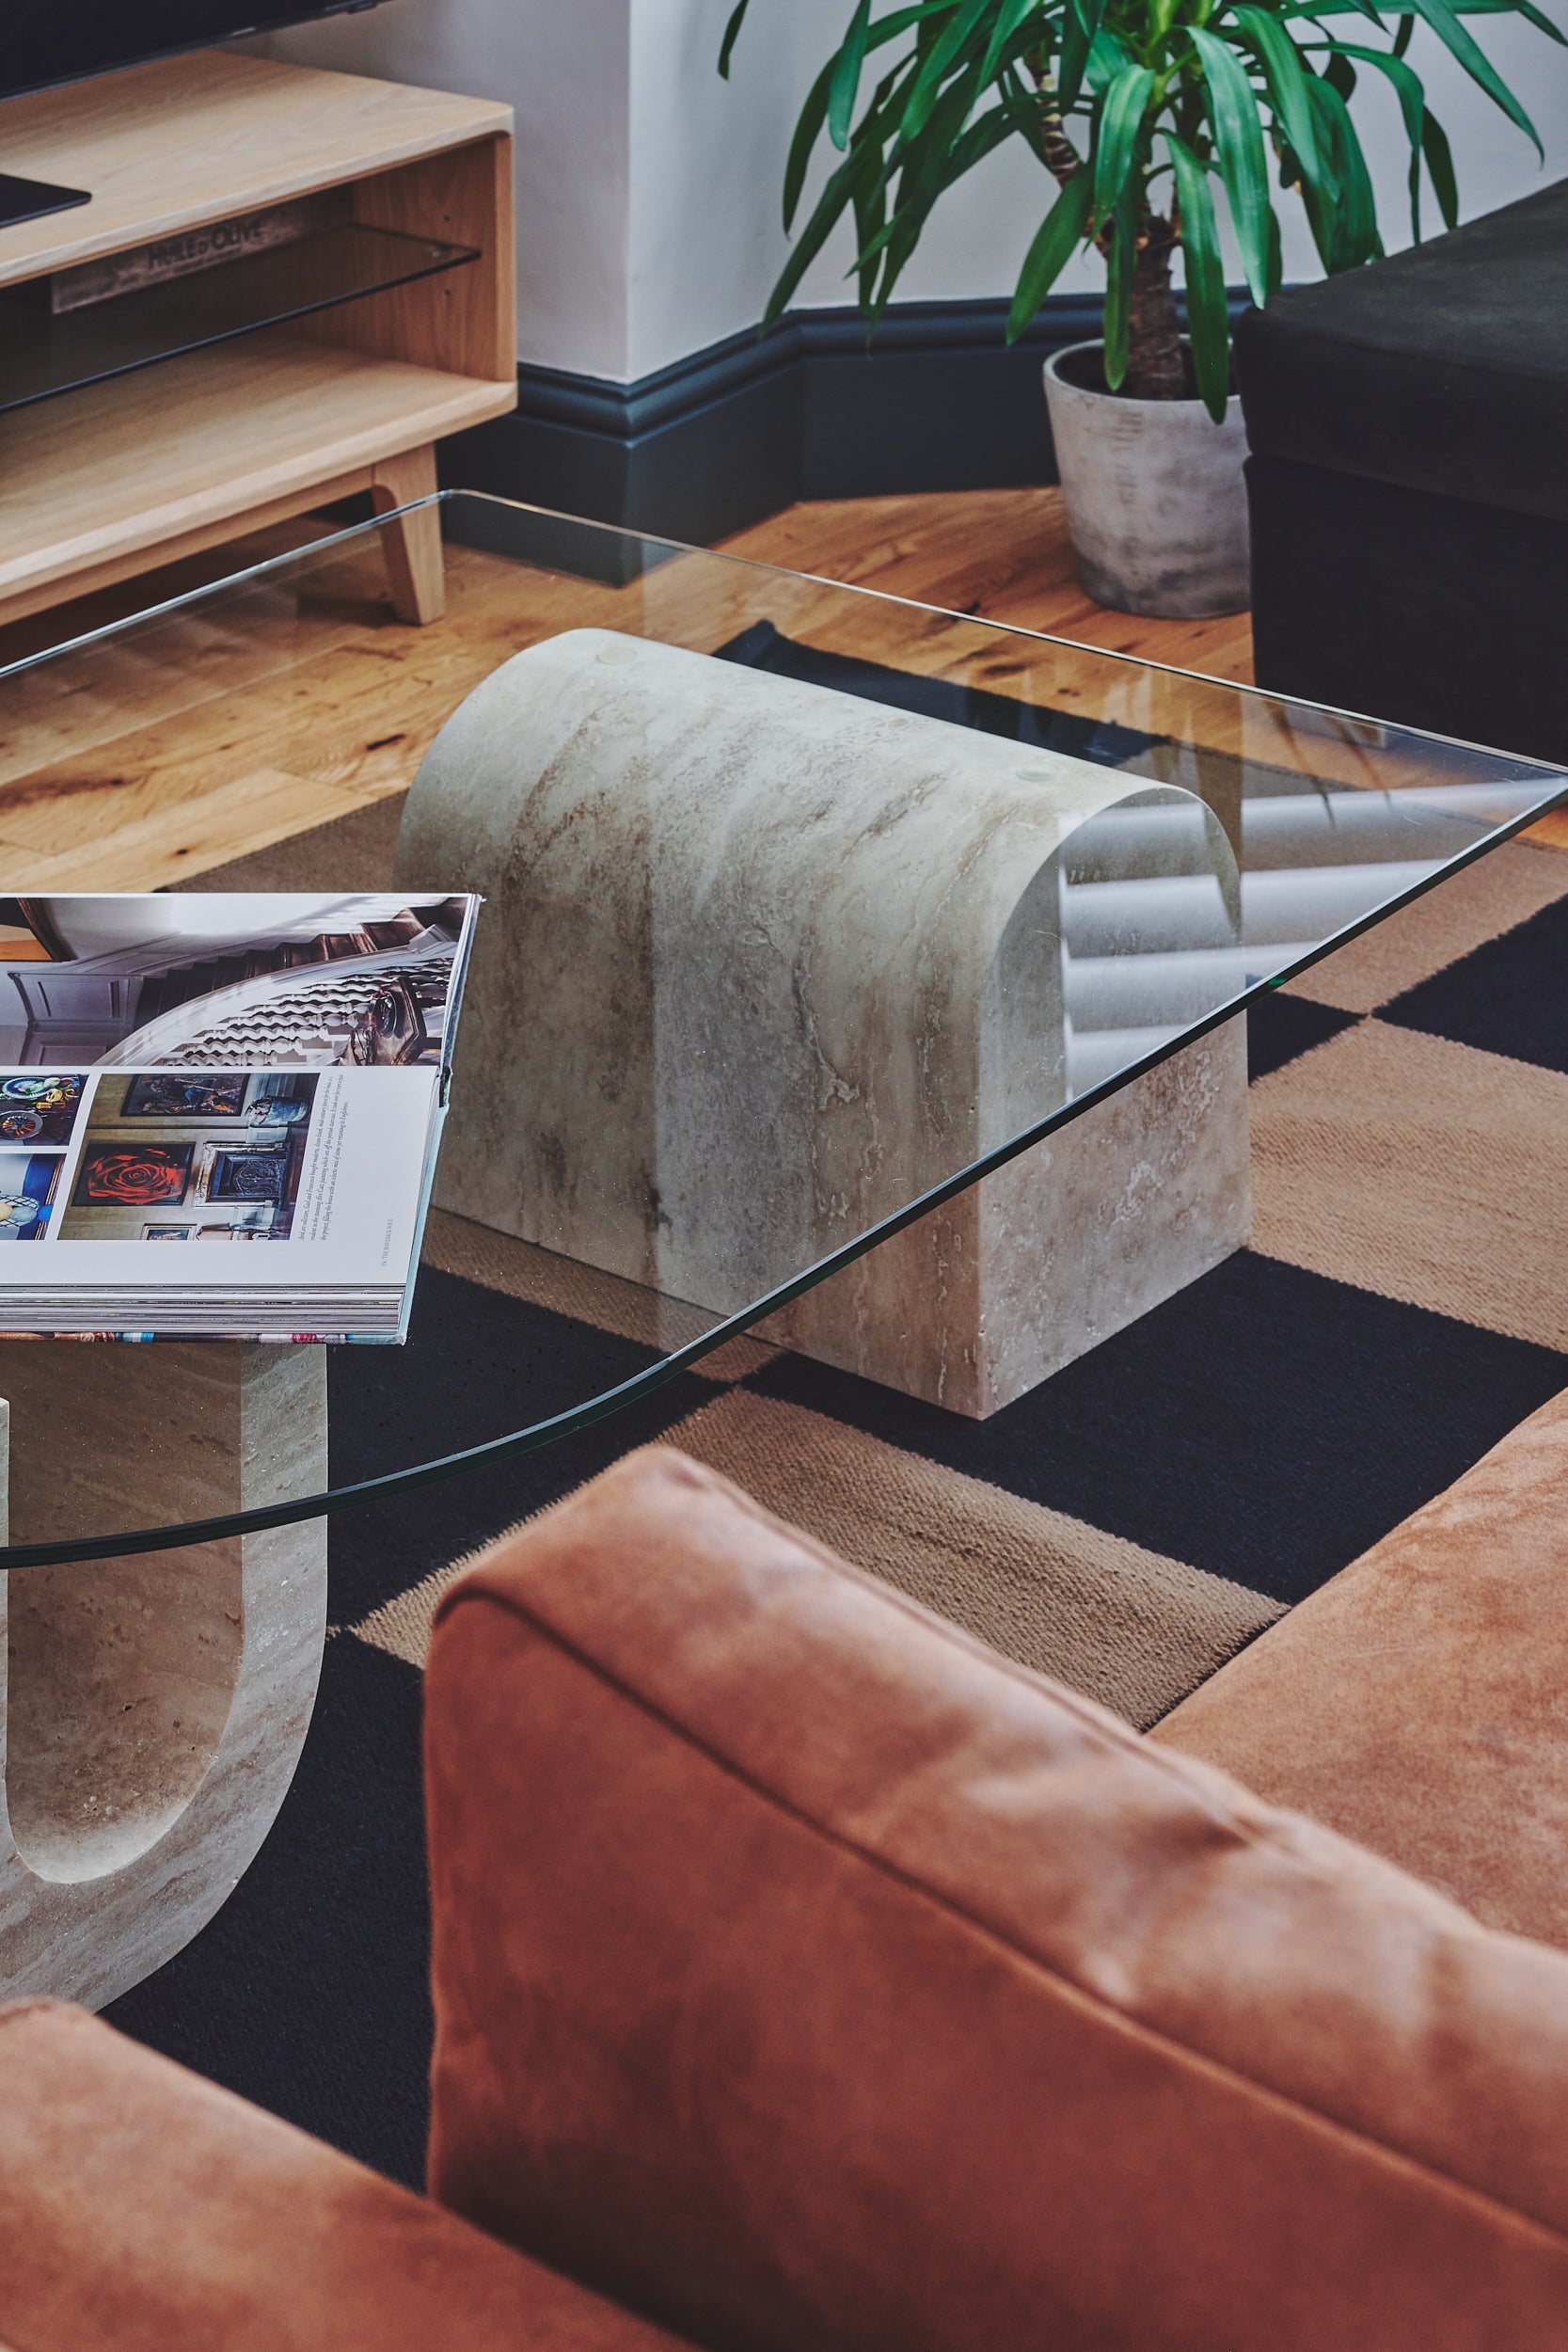 To make spaces feel larger, opt for glass furniture so you can see around and through items